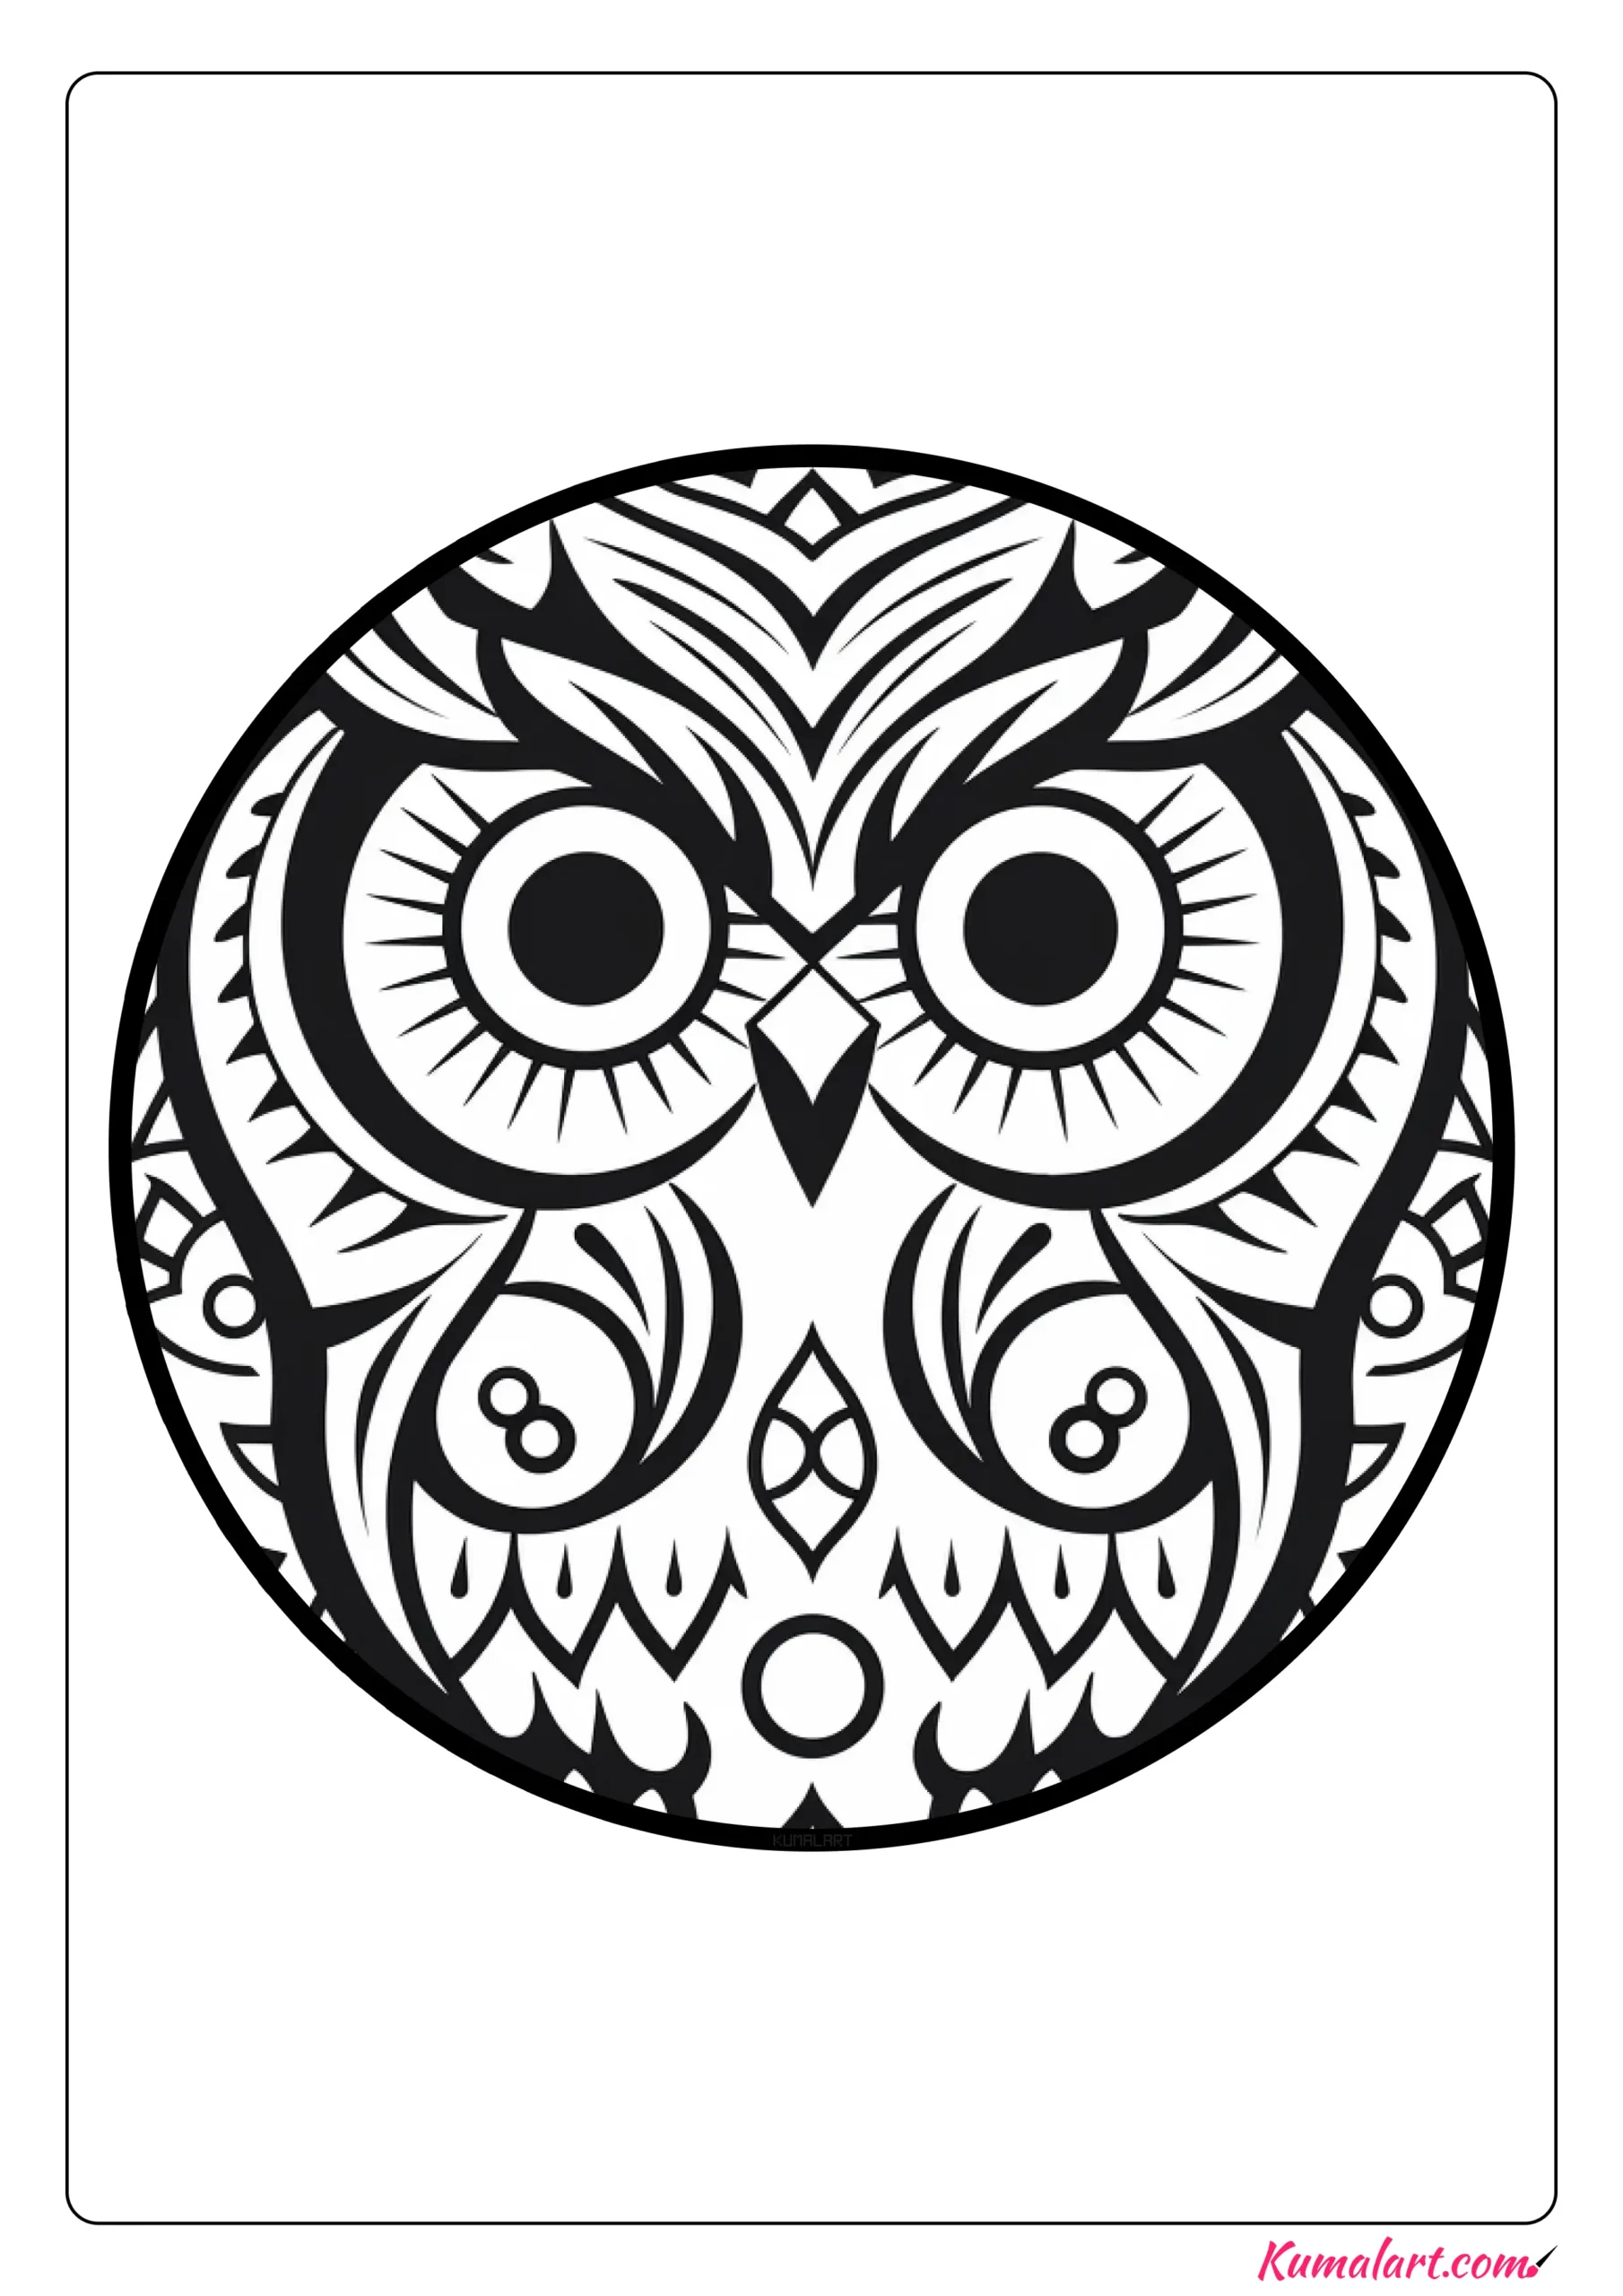 Alice the Owl Mandala Coloring Page